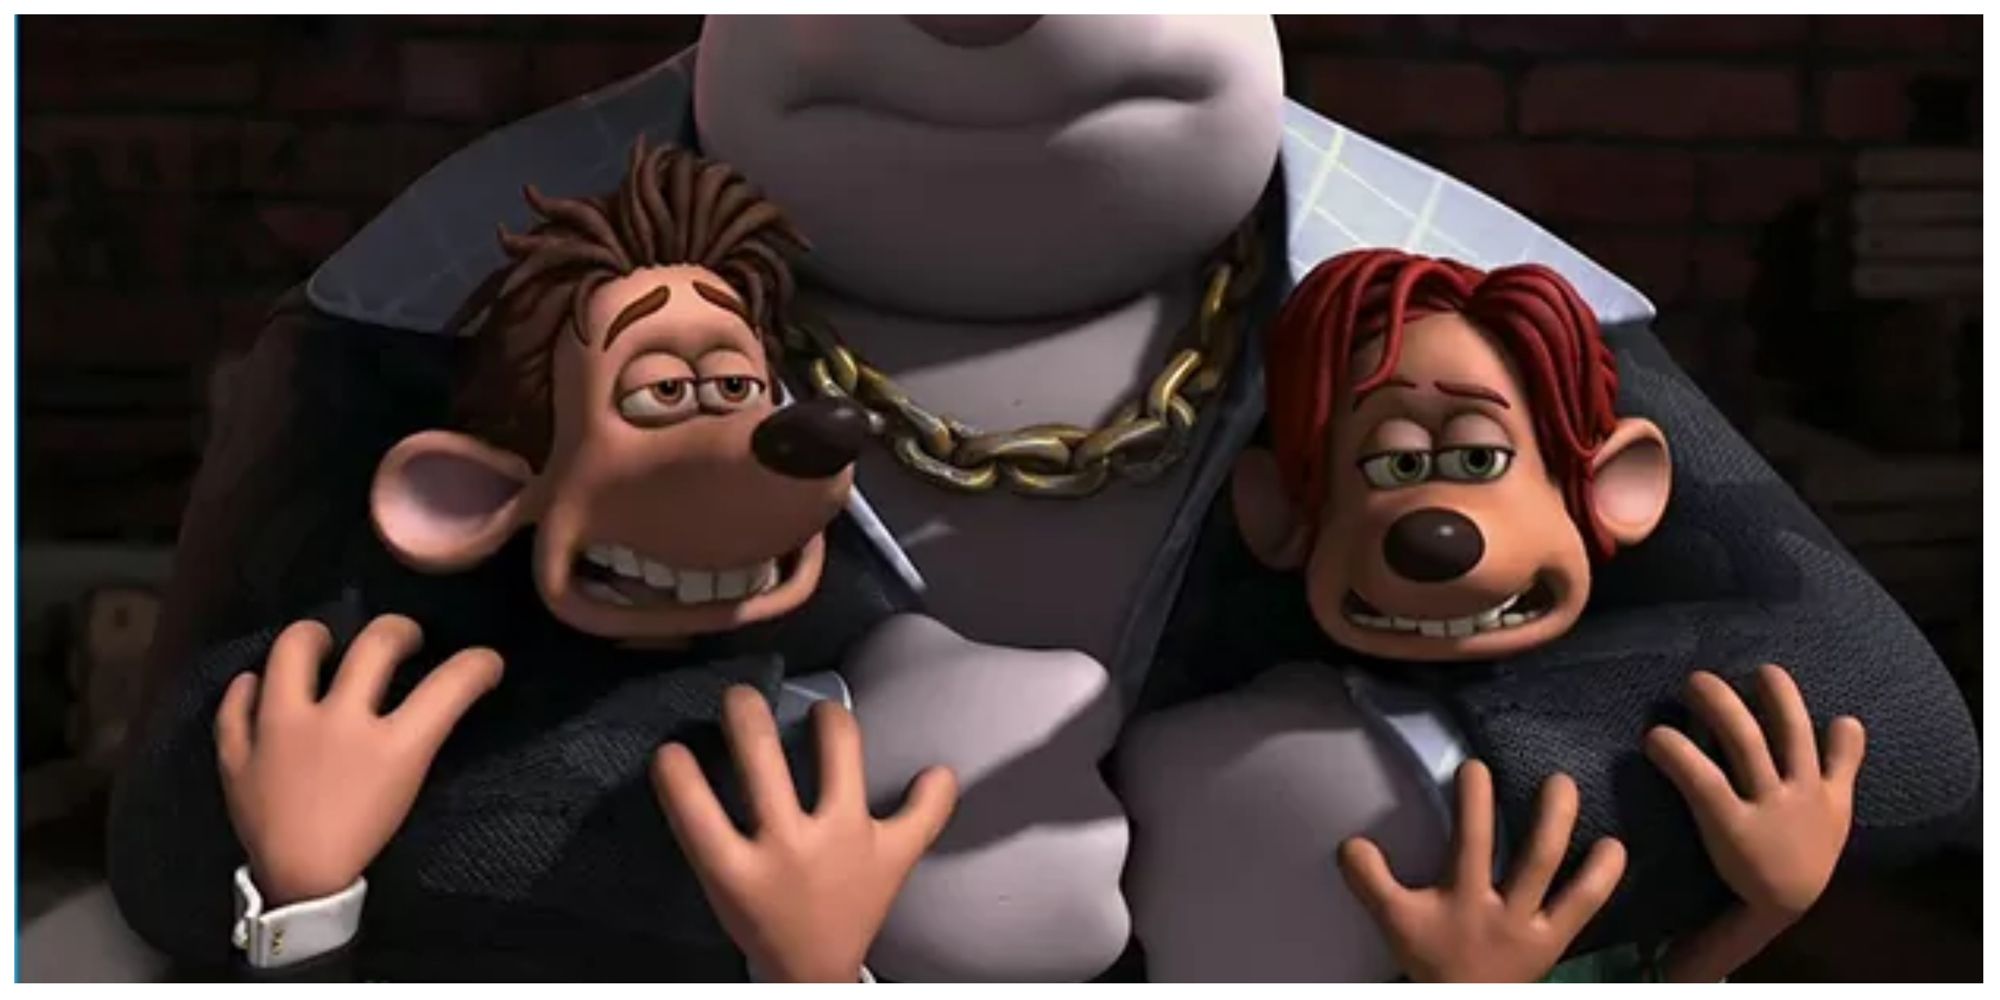 Roddy and Rita in Flushed Away